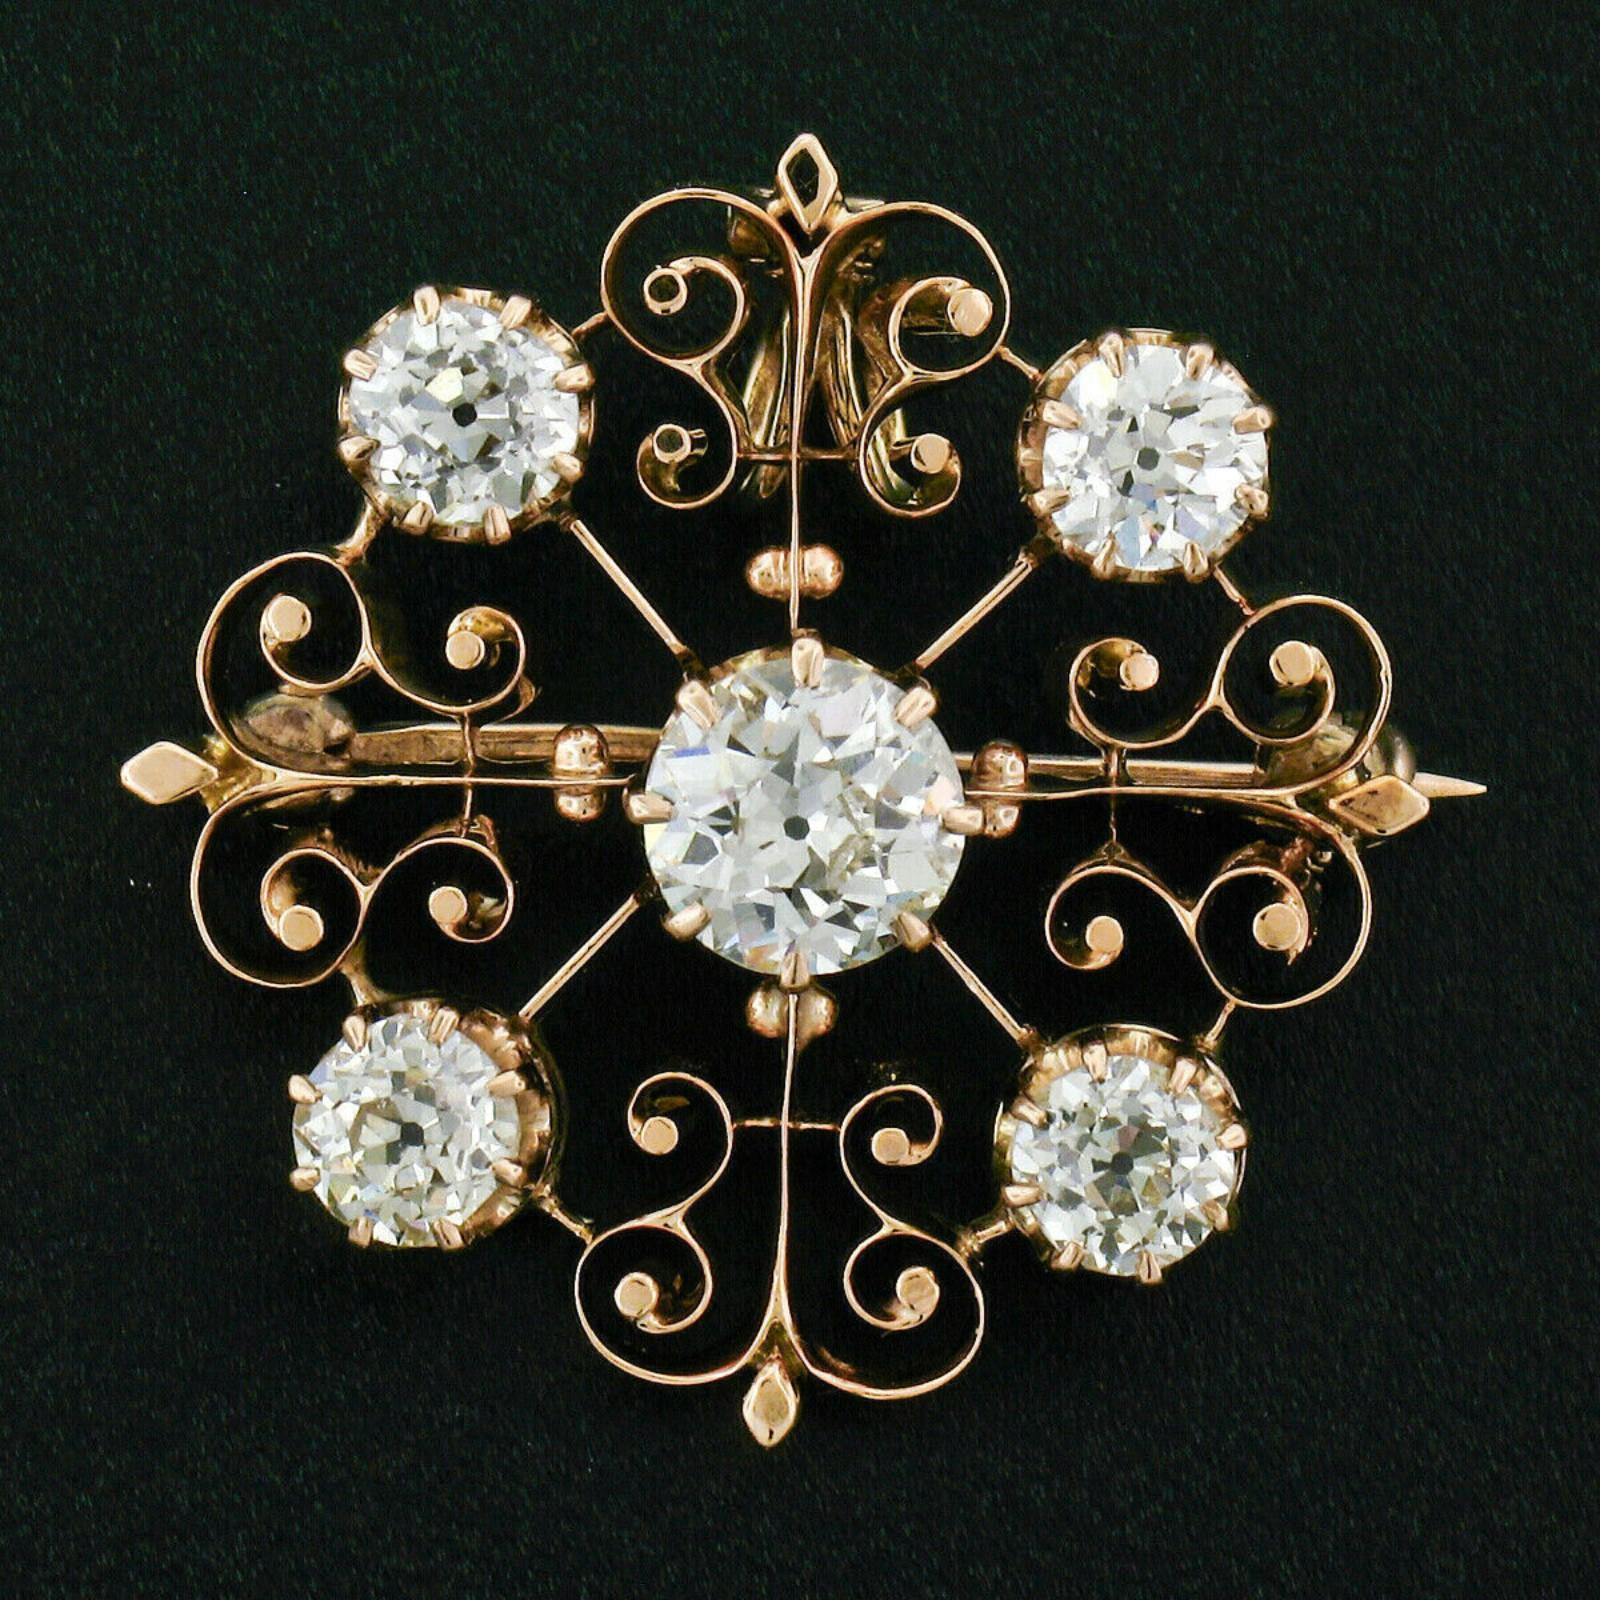 Here we have a stunning antique brooch or pendant which was crafted in solid 14k yellow gold during the Victorian period. It features a gorgeous, approximately 1.0 carat, super fine quality old European cut diamond prong set at its center. The